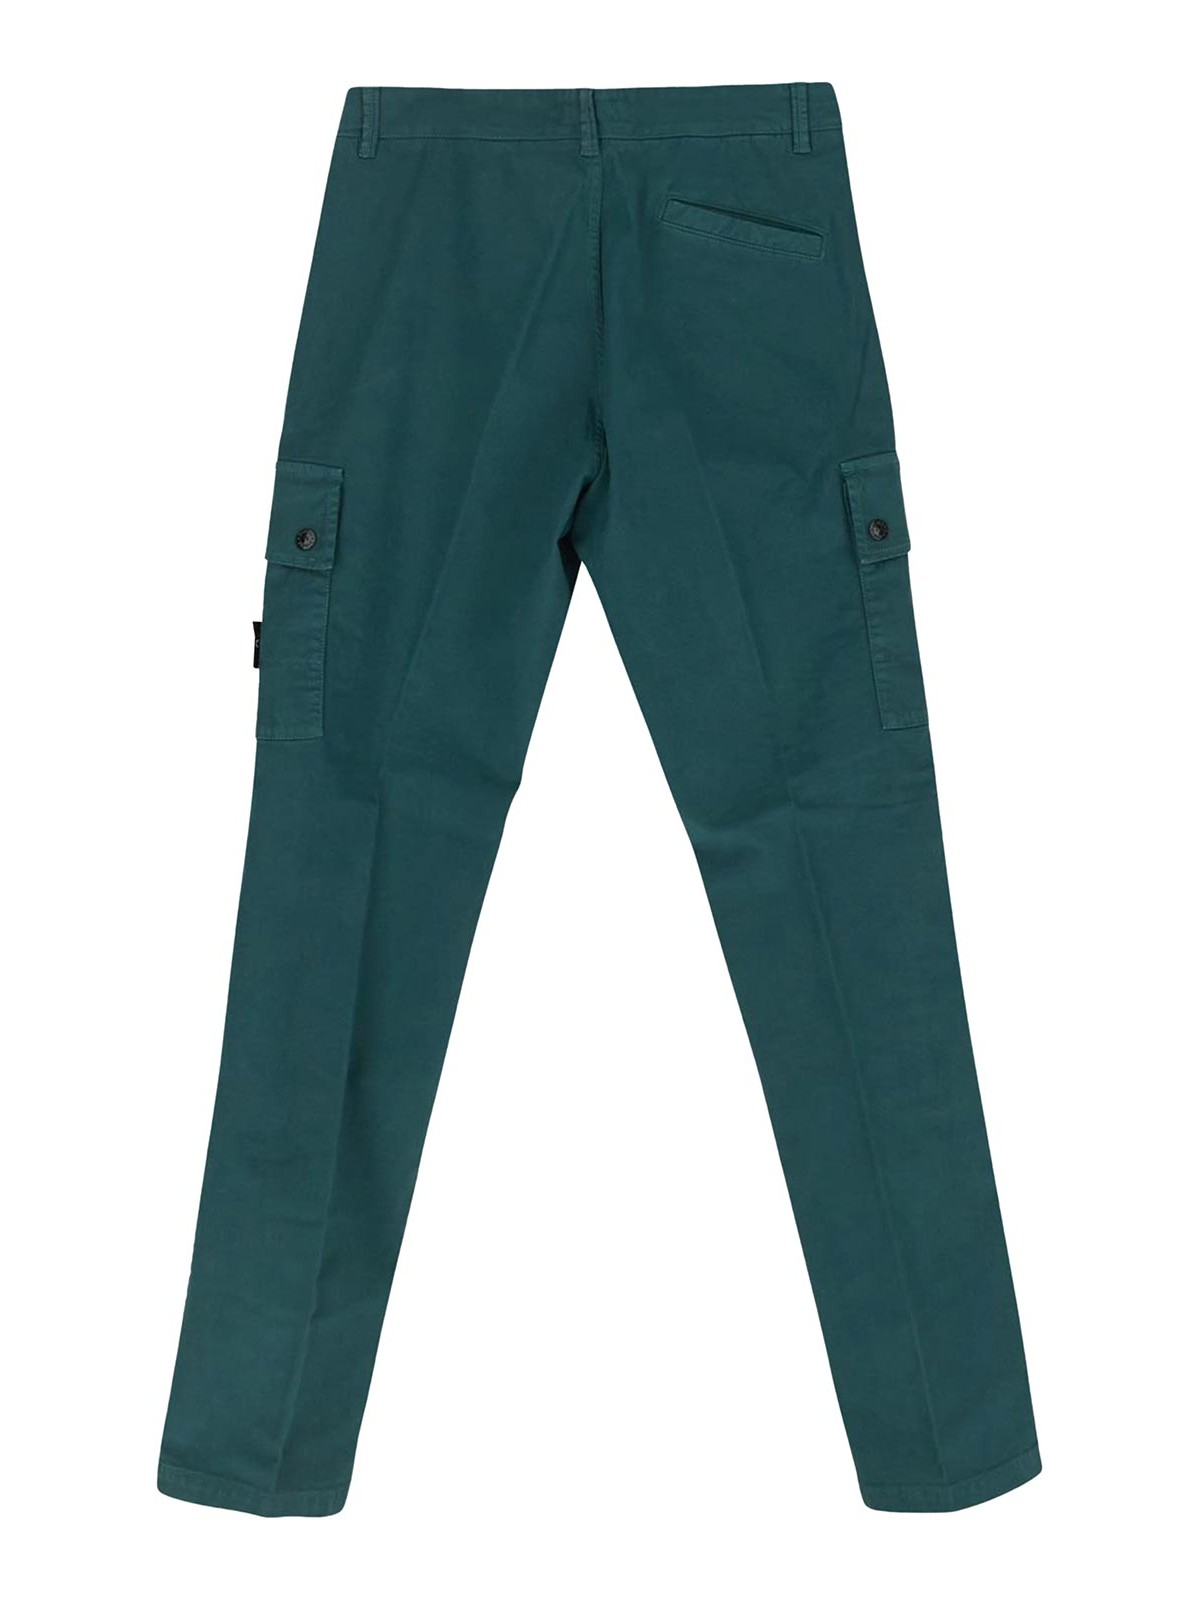 Stone Island Kids' Green Trousers With Side Pockets